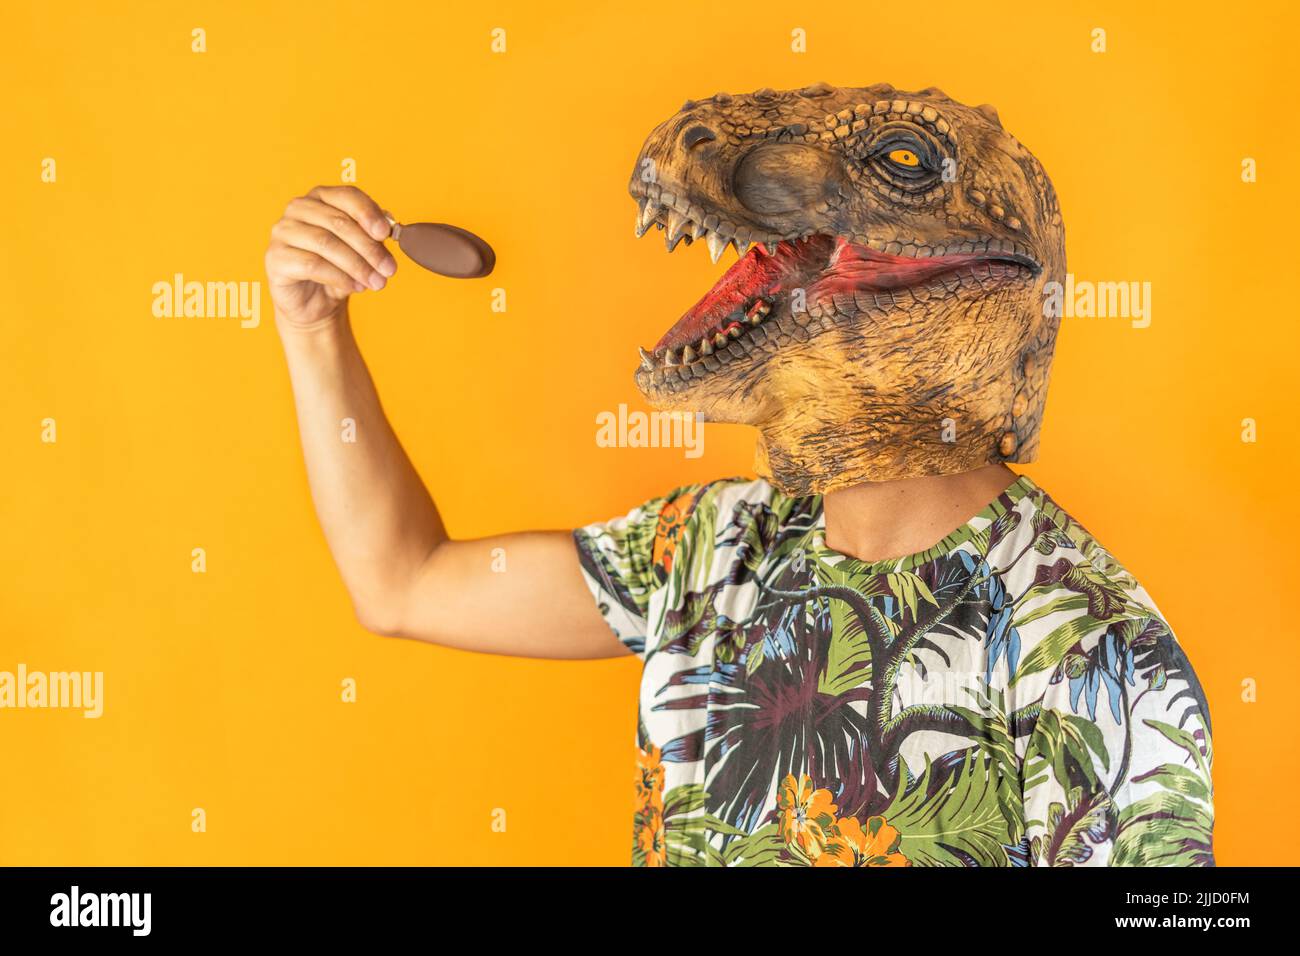 Man in dinosaur animal head mask eating chocolate ice cream isolated on yellow background with copy space Stock Photo